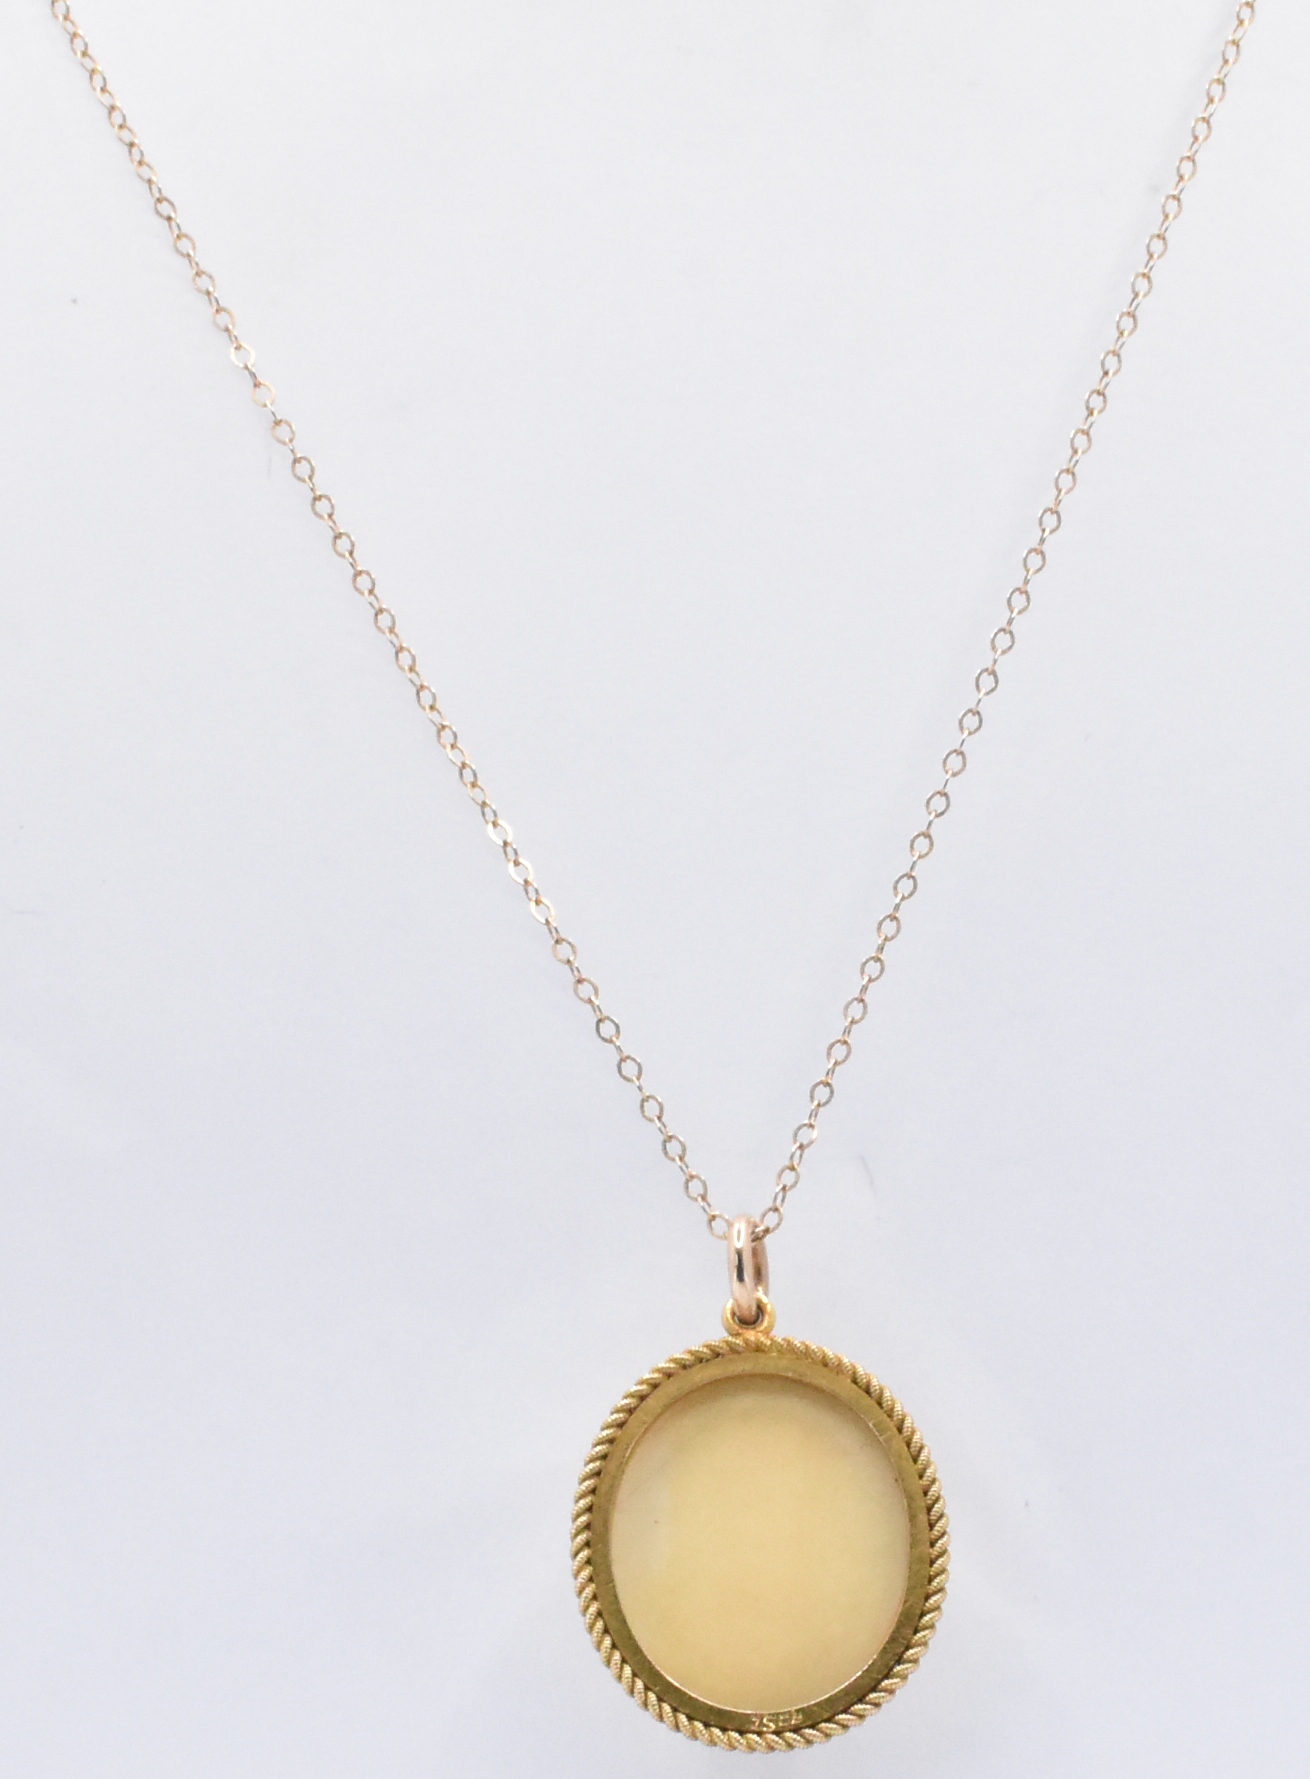 EARLY 20TH CENTURY 15CT GOLD AND CARVED IVORY CANTONESE PENDANT NECKLACE - Image 3 of 6